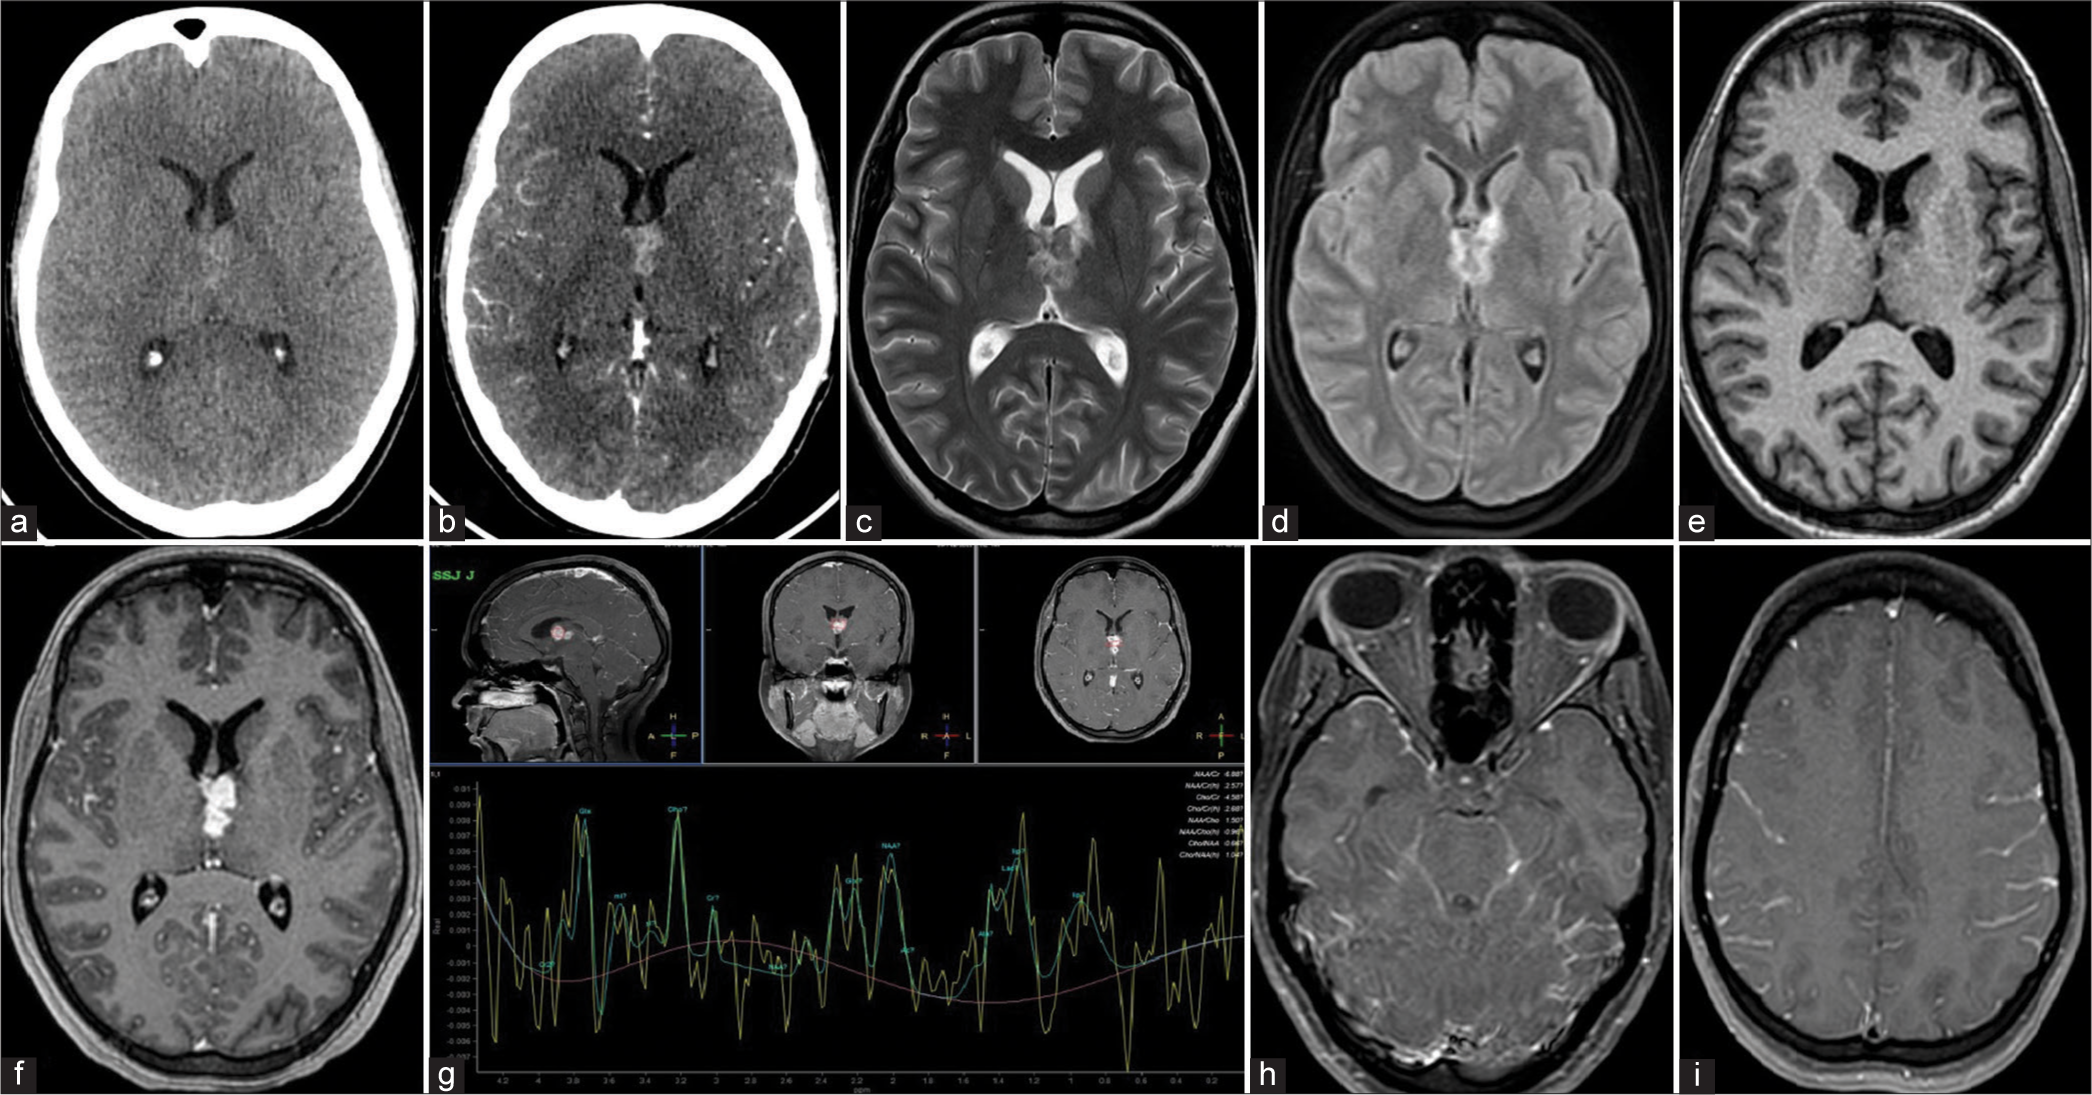 Computed tomography brain plain (a) and contrast (b) axial sections at the level of roof of the third ventricle show a relatively well-defined iso-hyperdense lesion with intense homogeneous post-contrast enhancement. Magnetic resonance imaging (MRI) brain T2 (c) and FLAIR (d) axial sections at the level of roof of the third ventricle show a T2 hypointense lesion which does not show suppression on fluid-attenuated inversion recovery (FLAIR) image. MRI brain T1 (e) and T1 gadolinium contrast (f) axial sections at the level of roof of the third ventricle show an iso-intense lesion which shows intense homogeneous post-contrast enhancement. Magnetic resonance-spectroscopy (g) shows a lipid lactate peak at 1.3 ppm. MRI brain T1 contrast axial images at the level of basal cisterns (h) and fronto-parietal sulci (i) show enhancement of basal cisterns and lepto-meningeal thickening/enhancement.